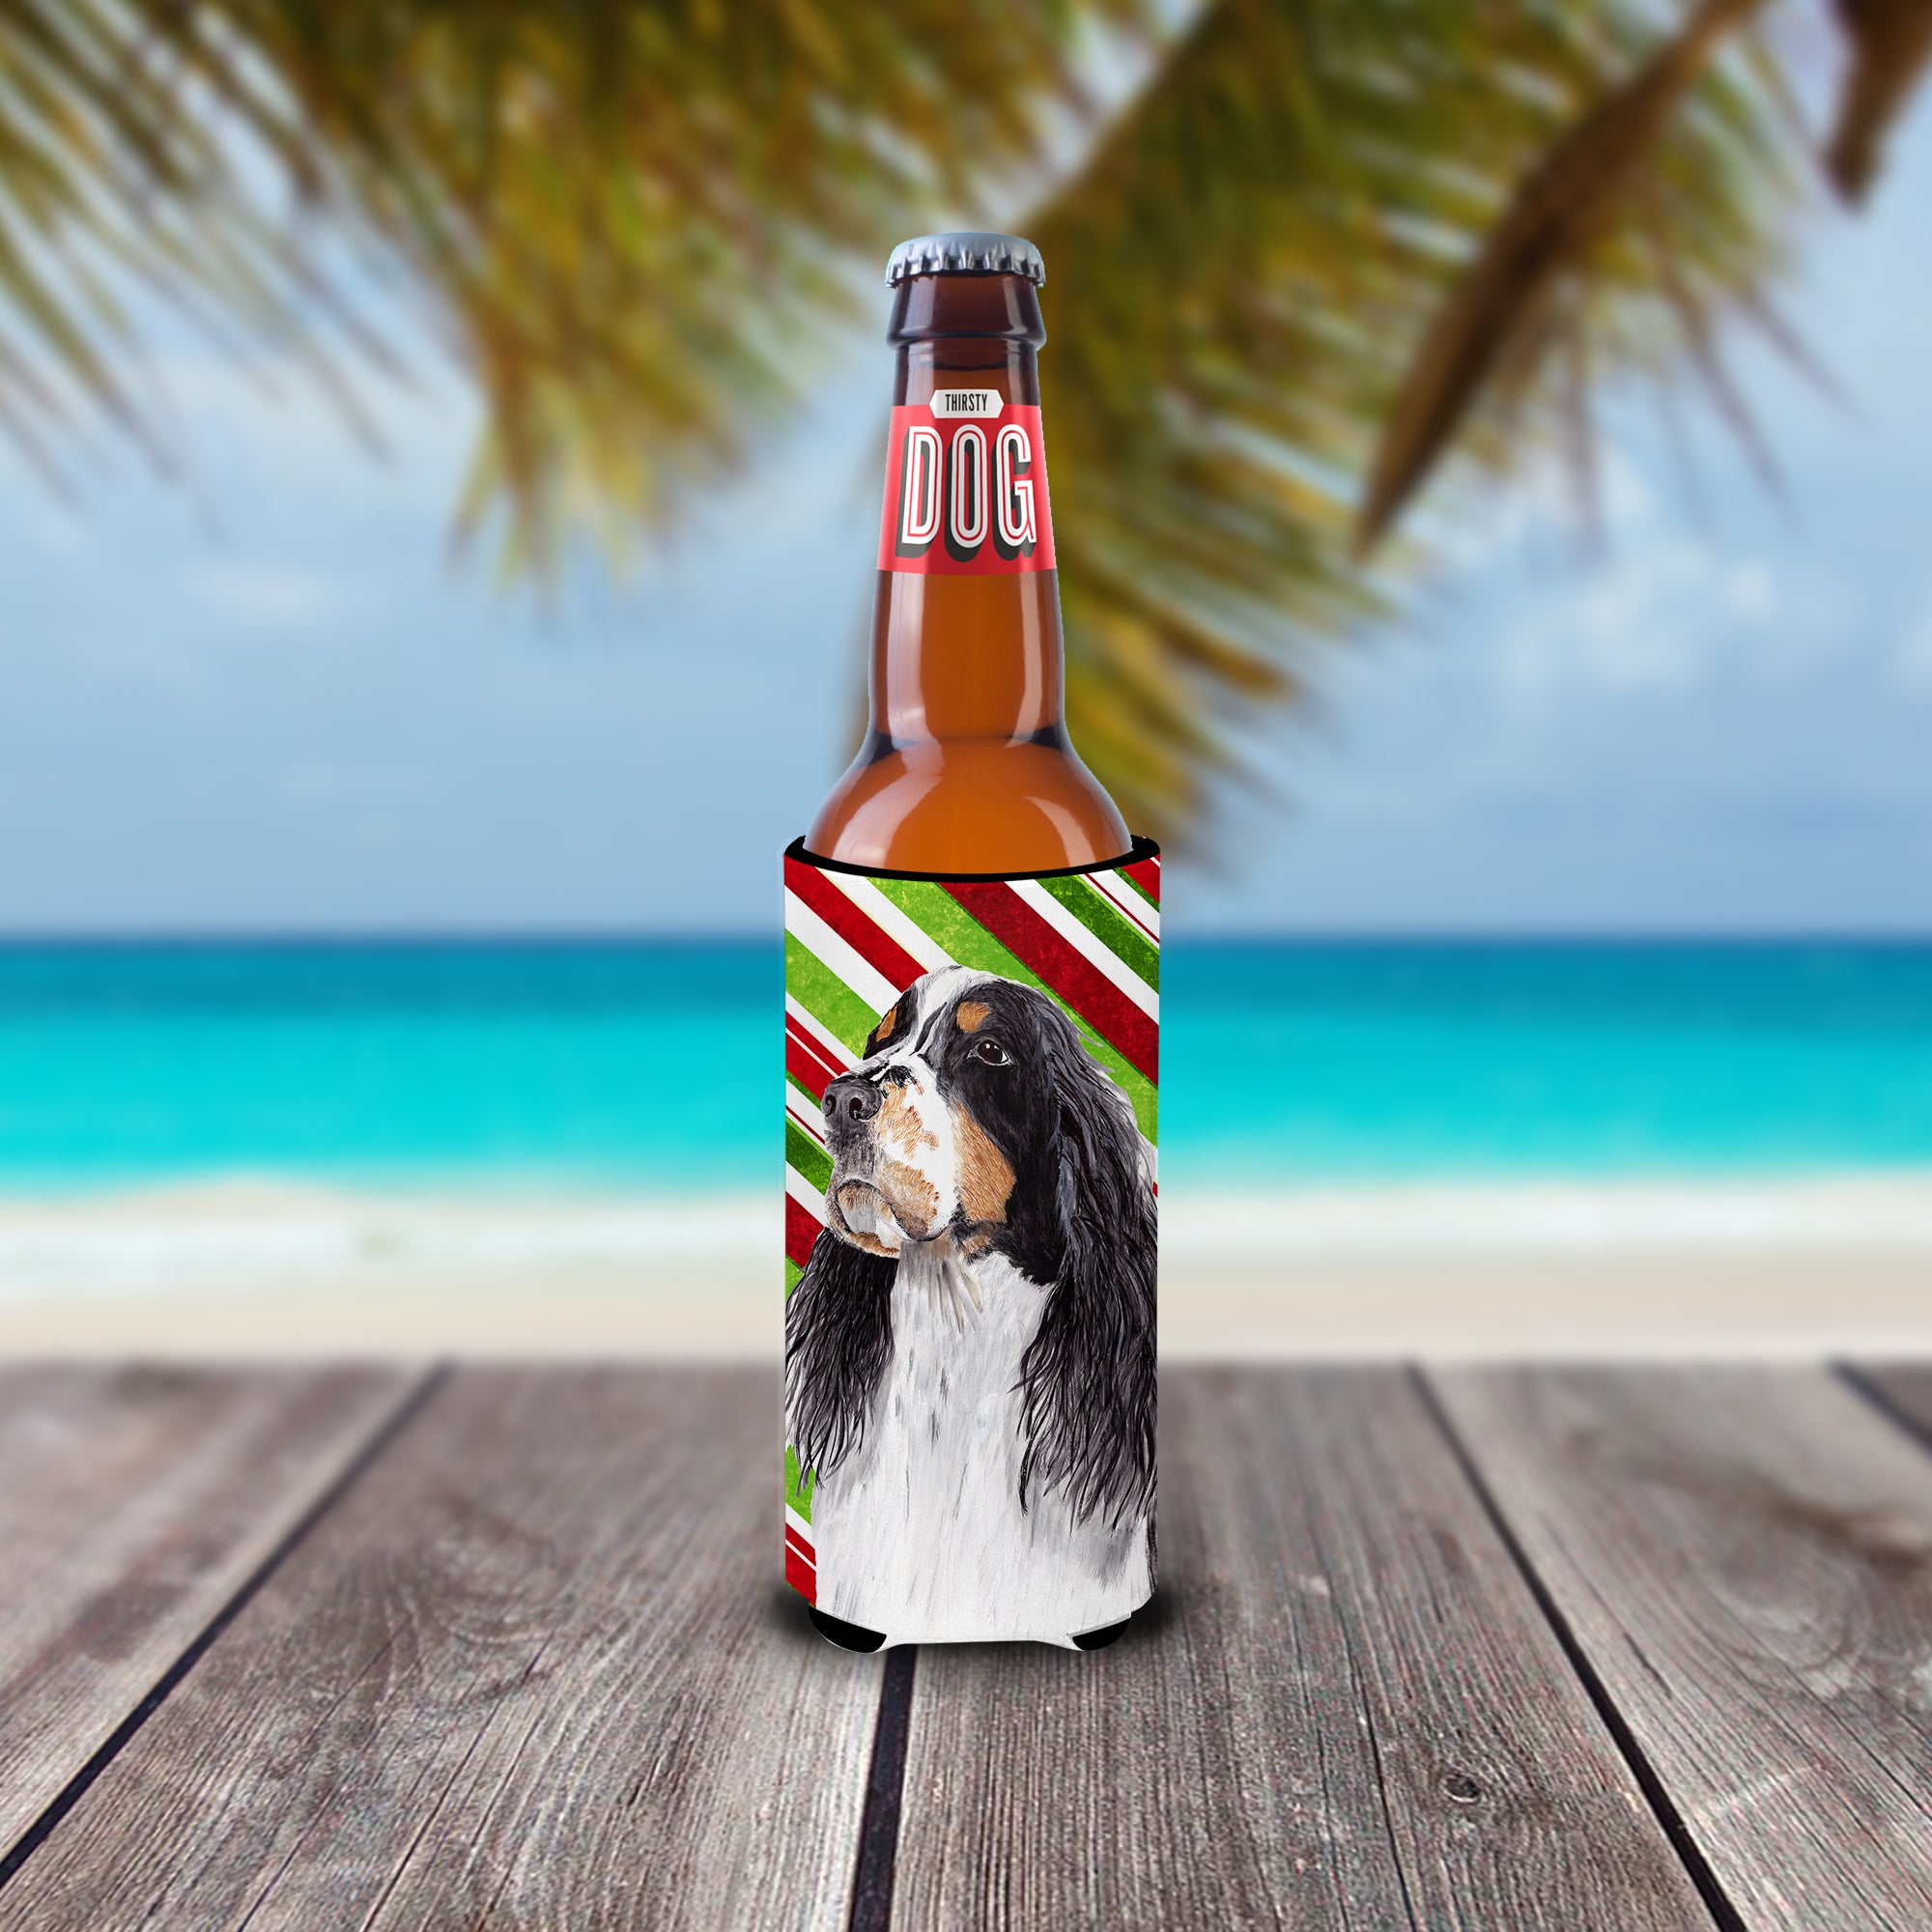 Springer Spaniel Candy Cane Holiday Christmas Ultra Beverage Isolateurs pour canettes minces SC9321MUK